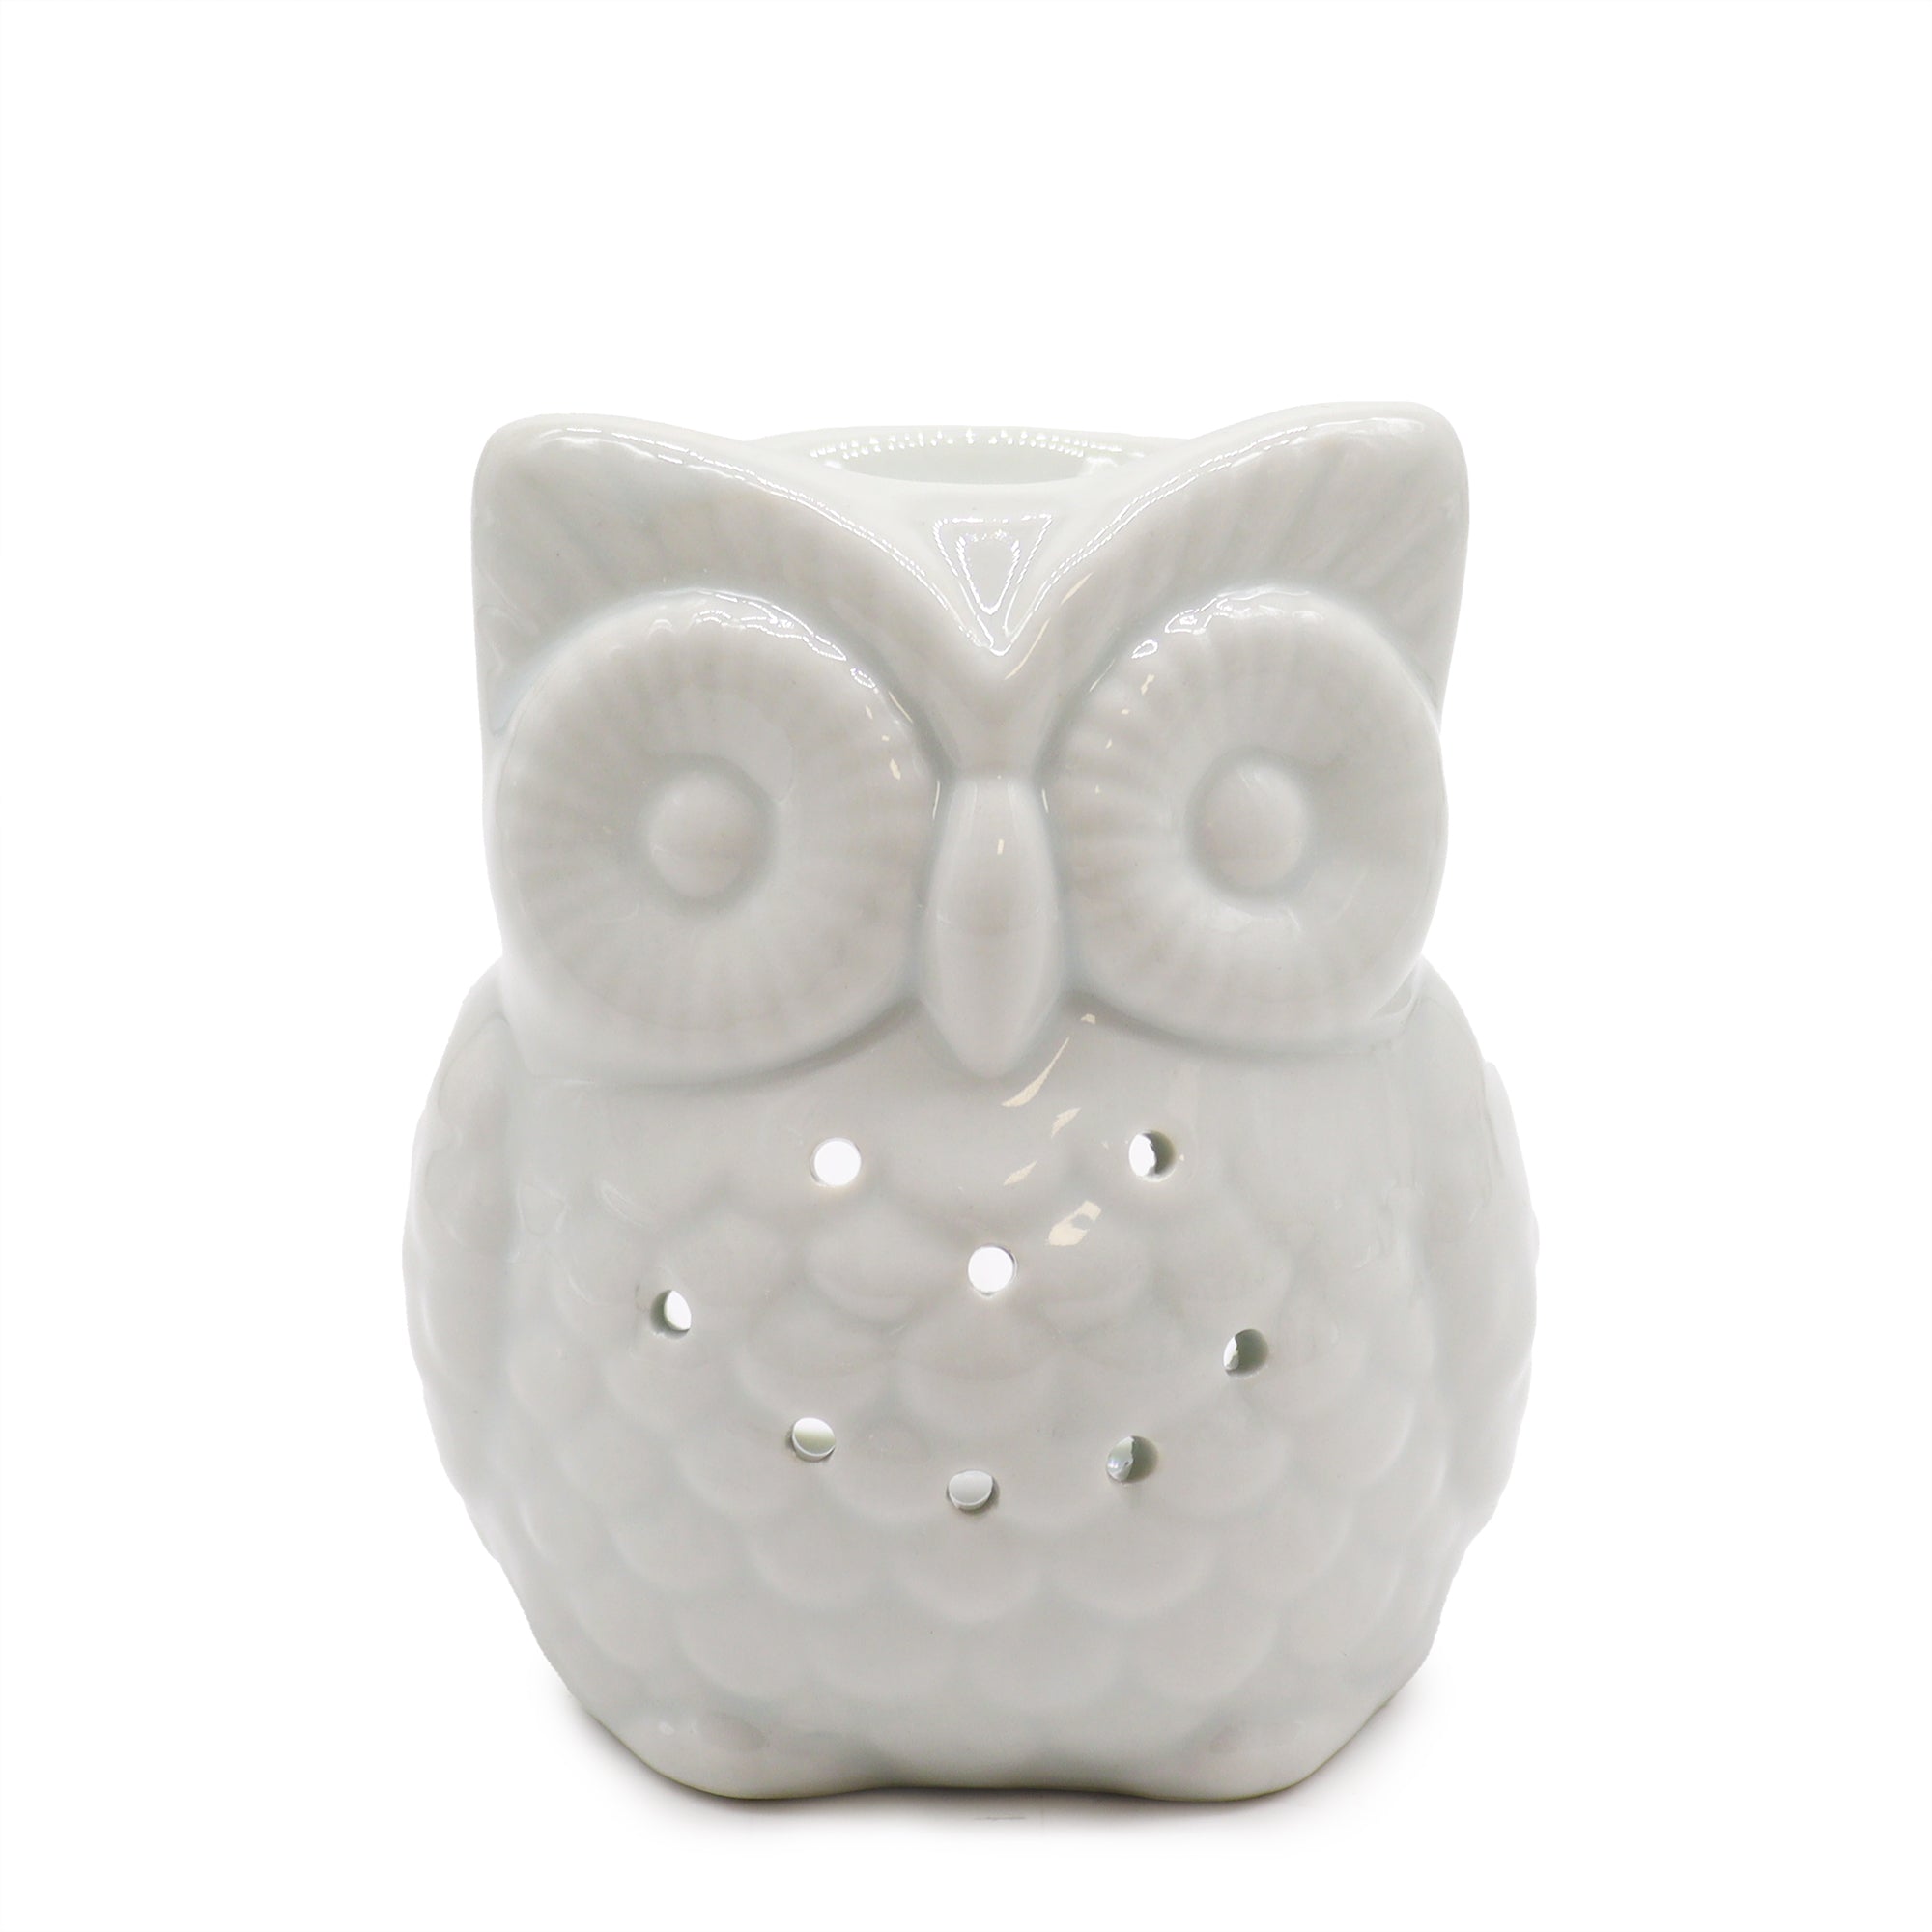 View Classic White Oil Burner Tall Owl information